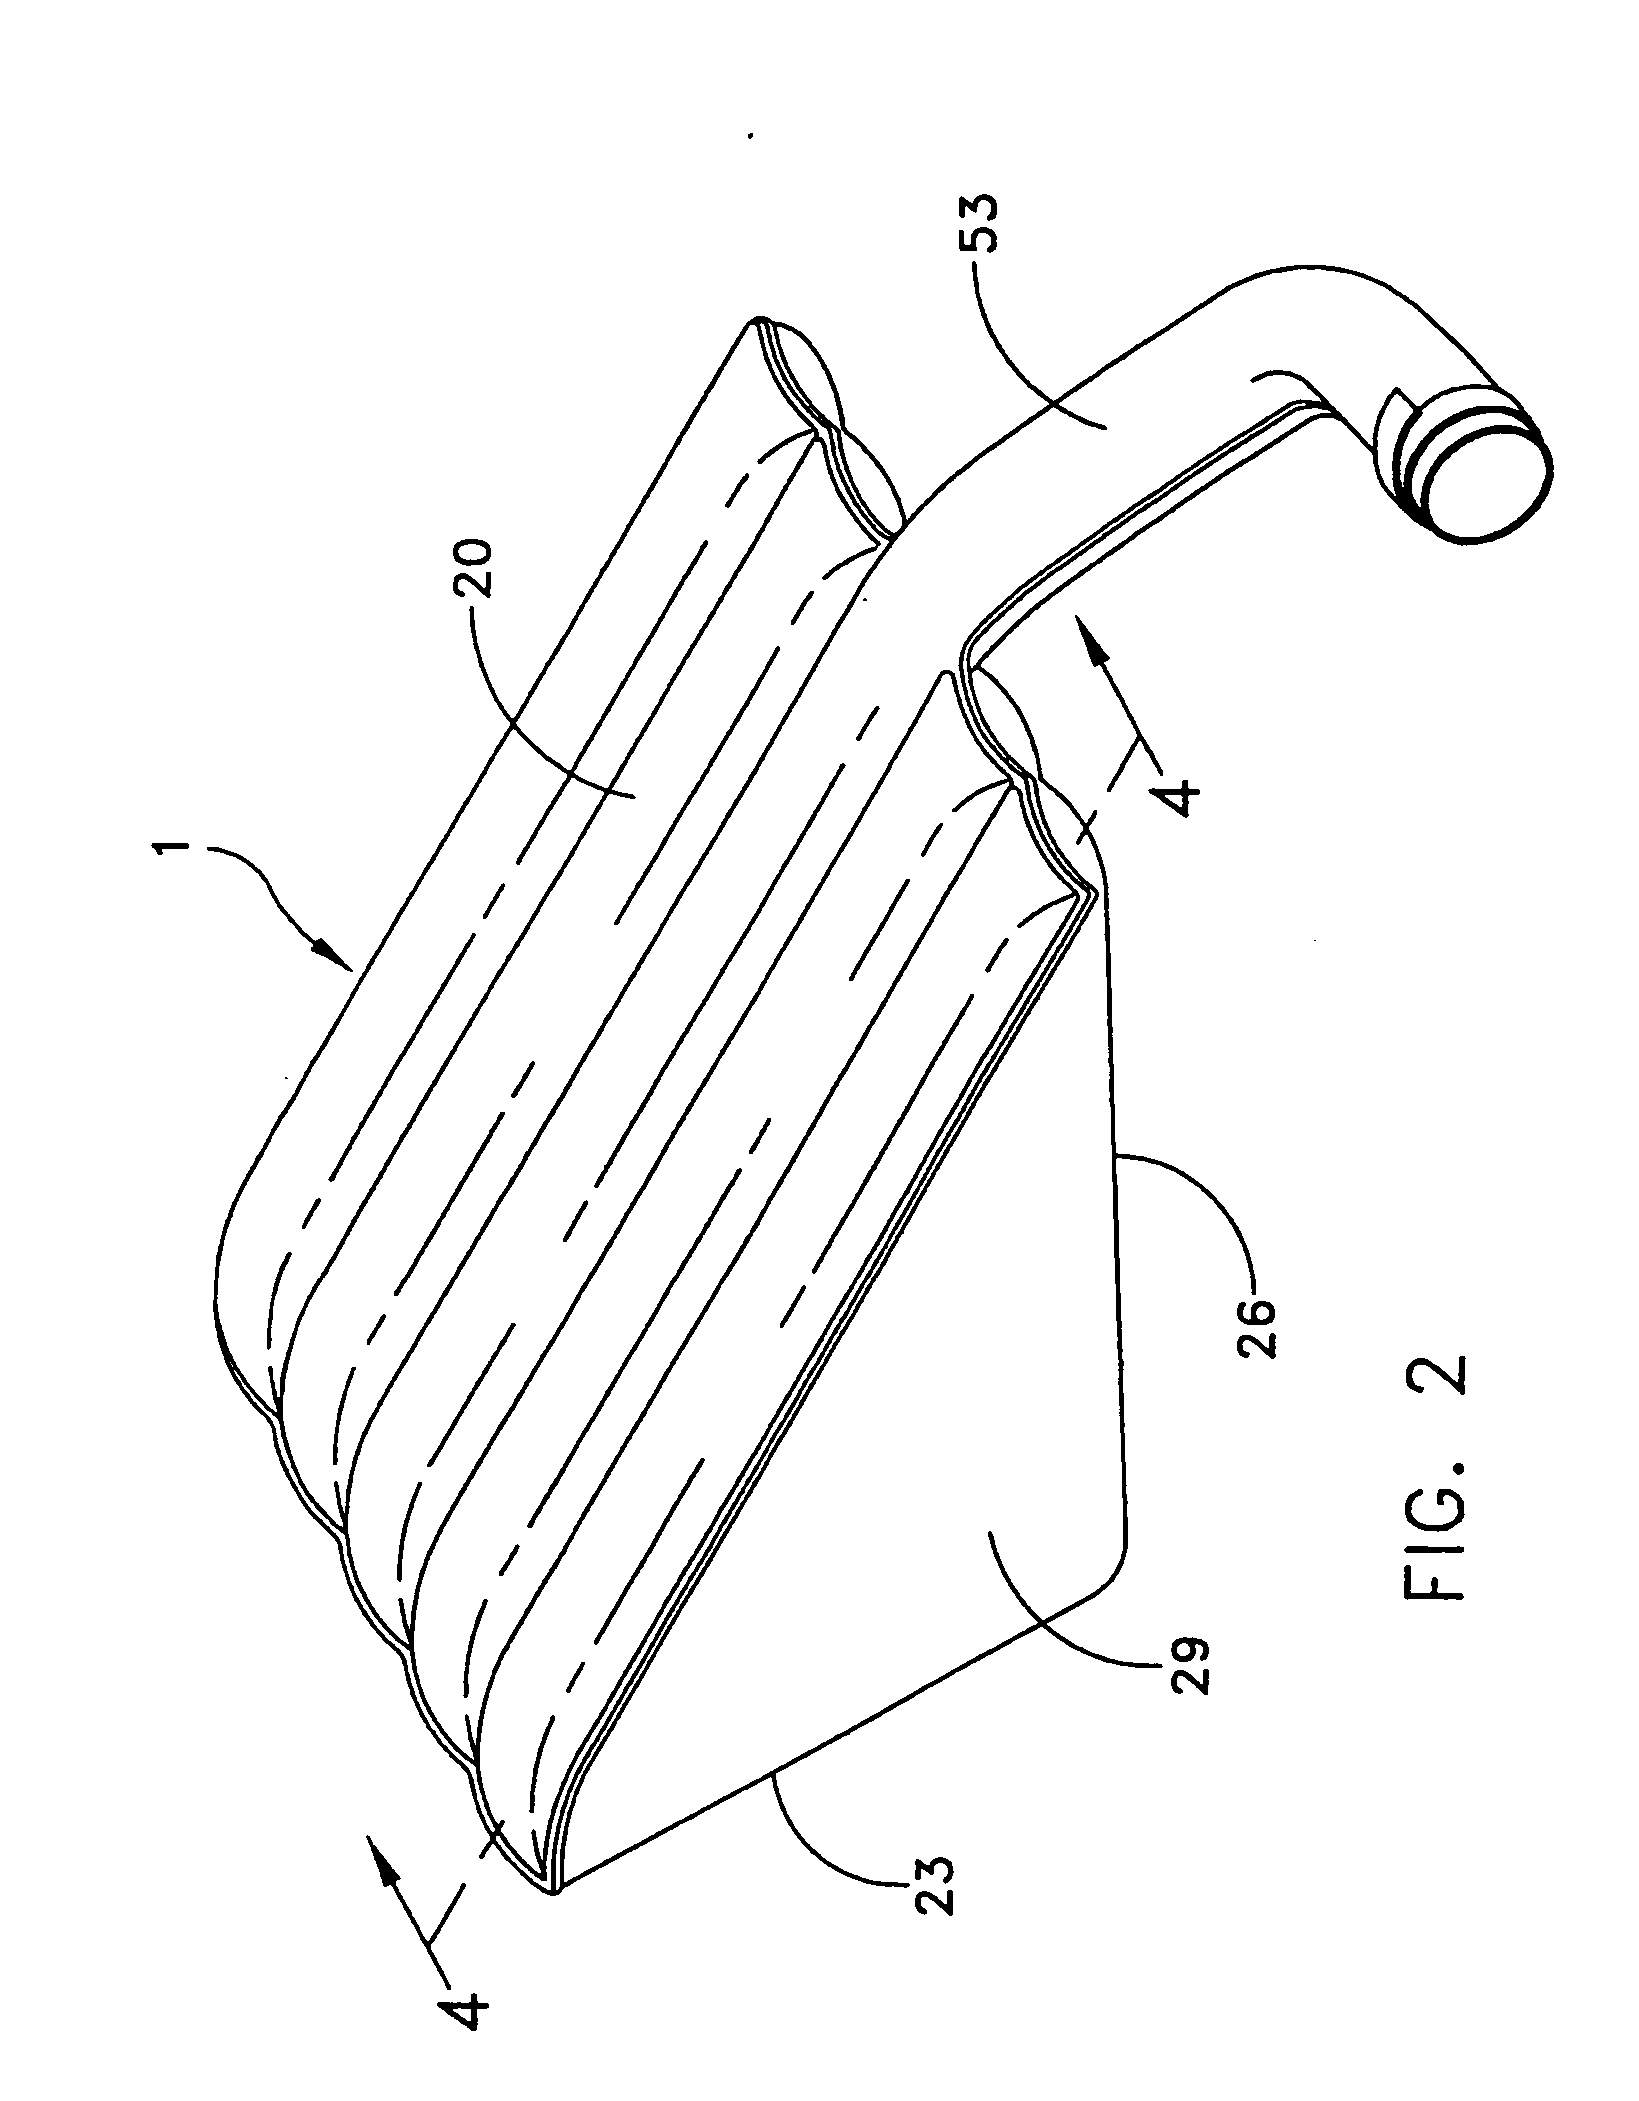 Lifting cushion and method for transferring a patient from a chair